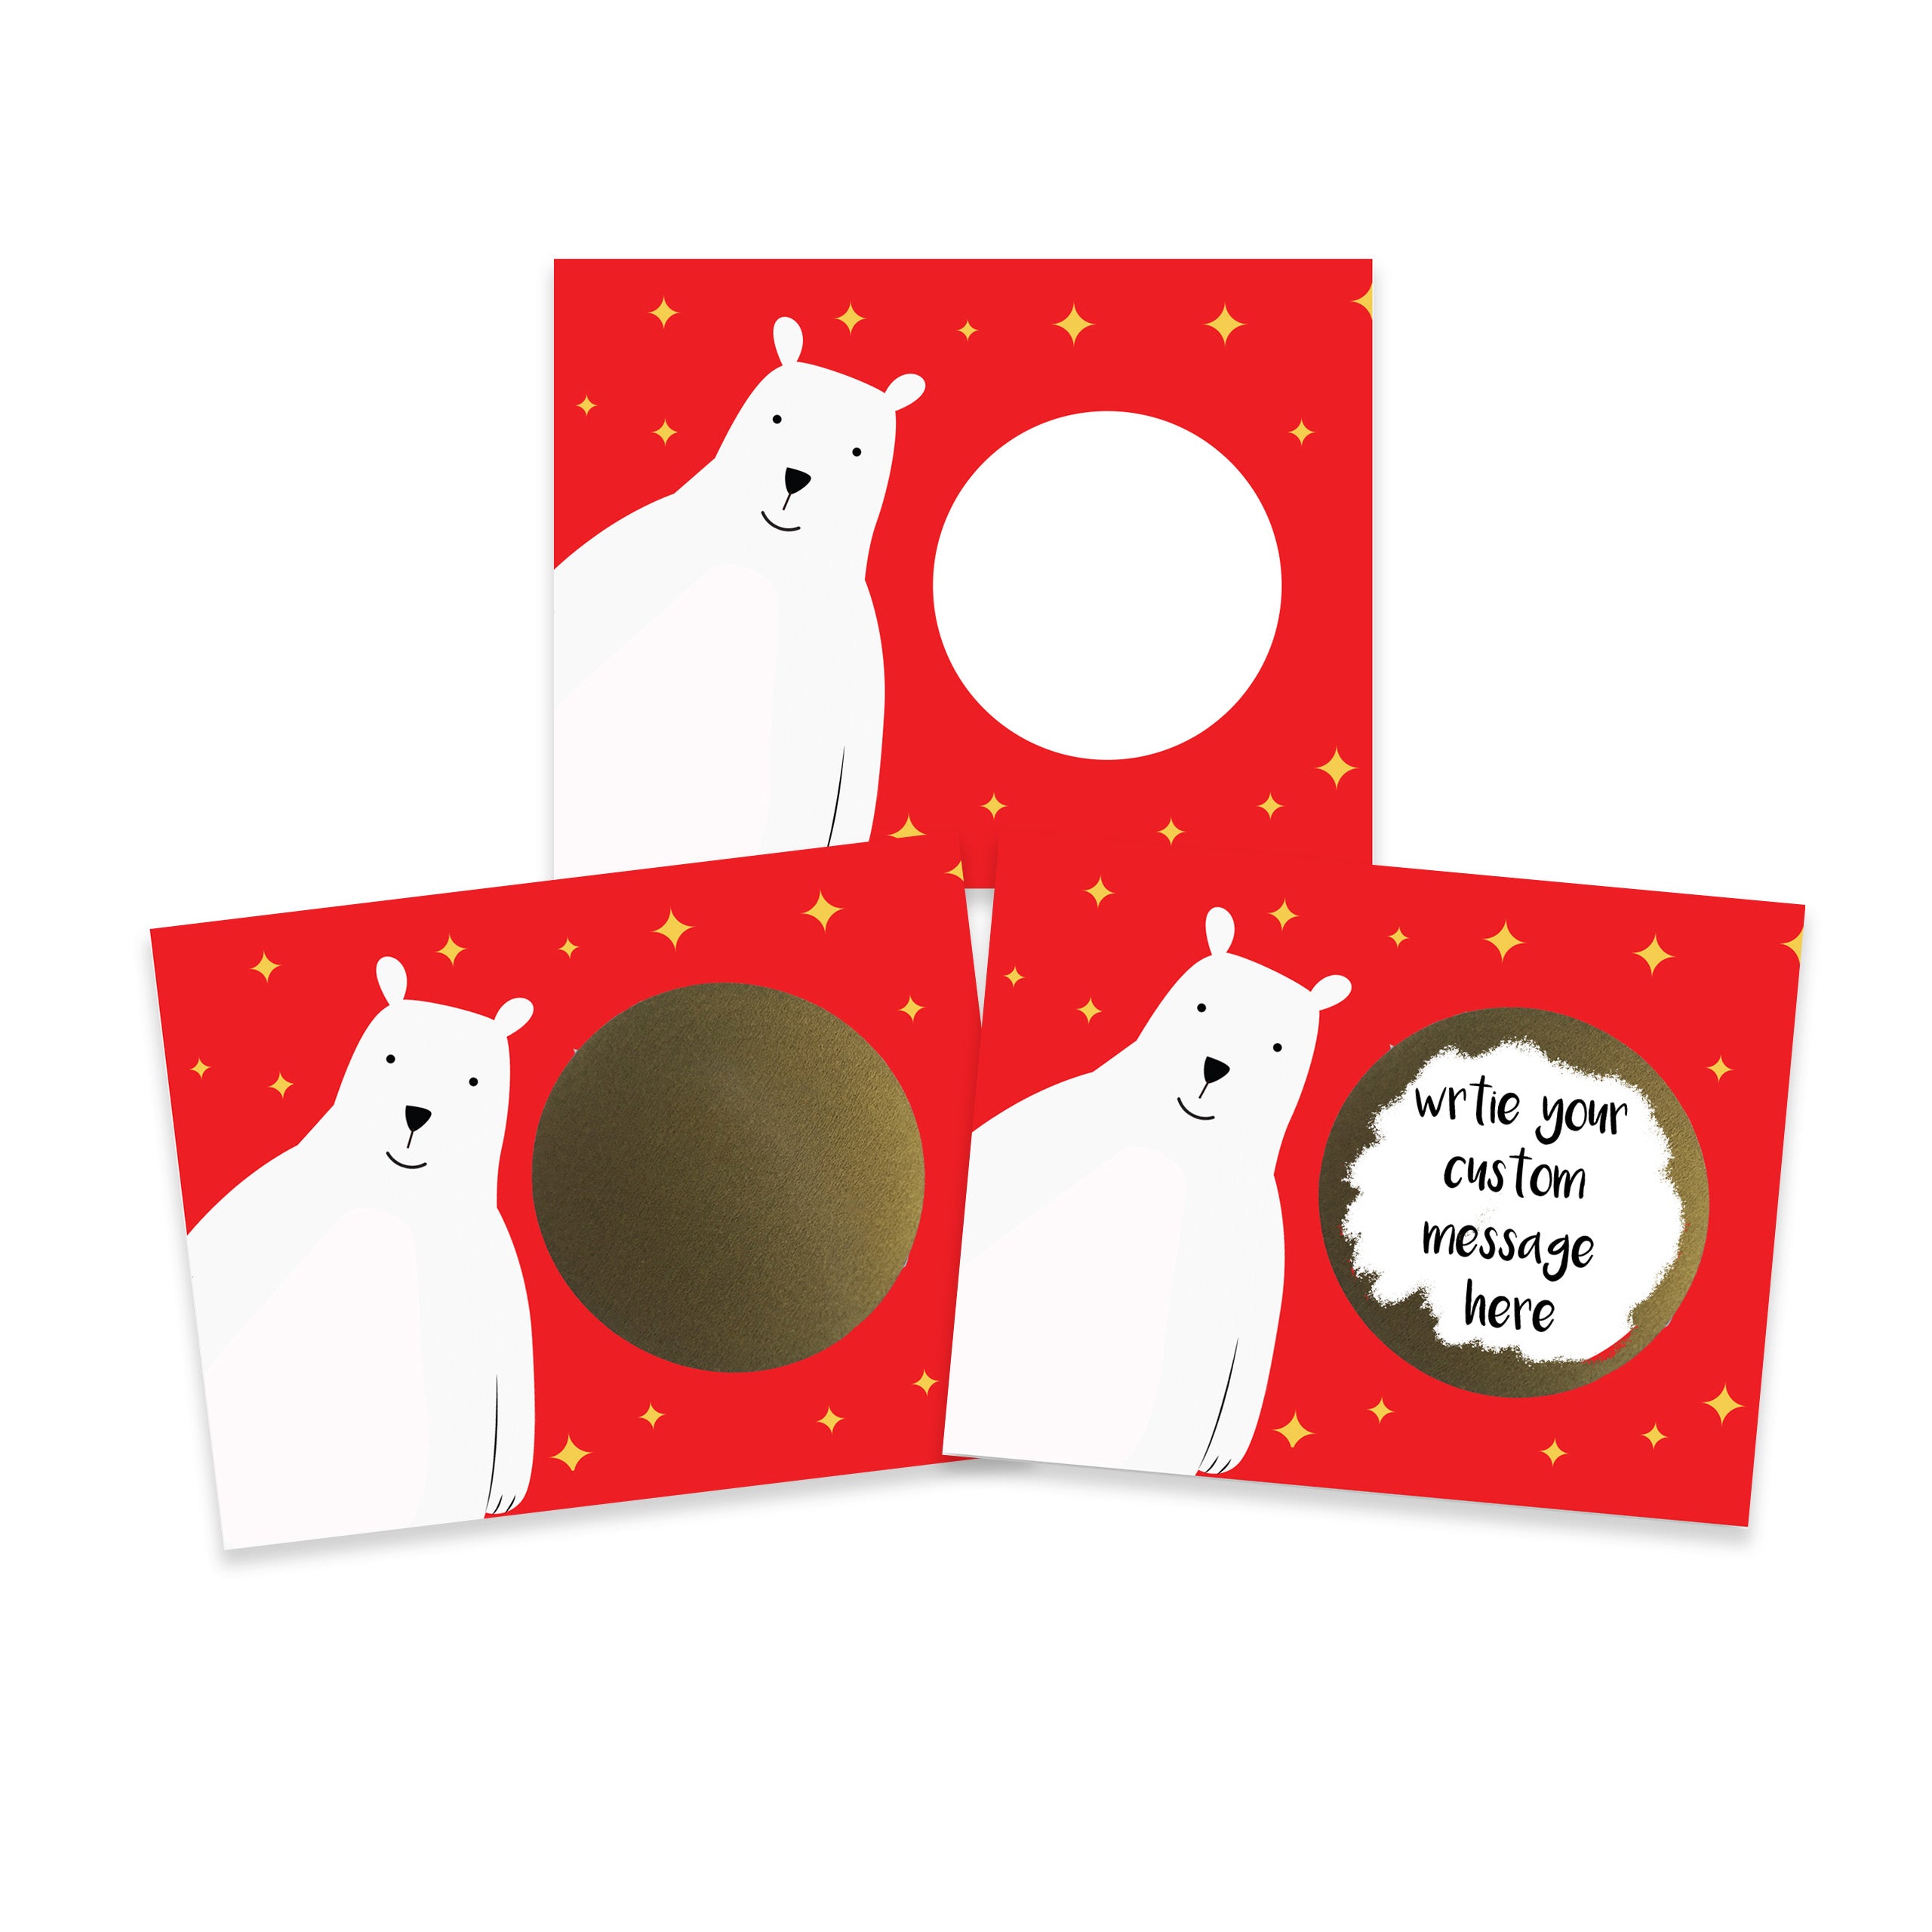 DIY Christmas Polar Bear Make Your Own Scratch Off Cards - 20 Cards and 20 Scratch Off Stickers - My Scratch Offs